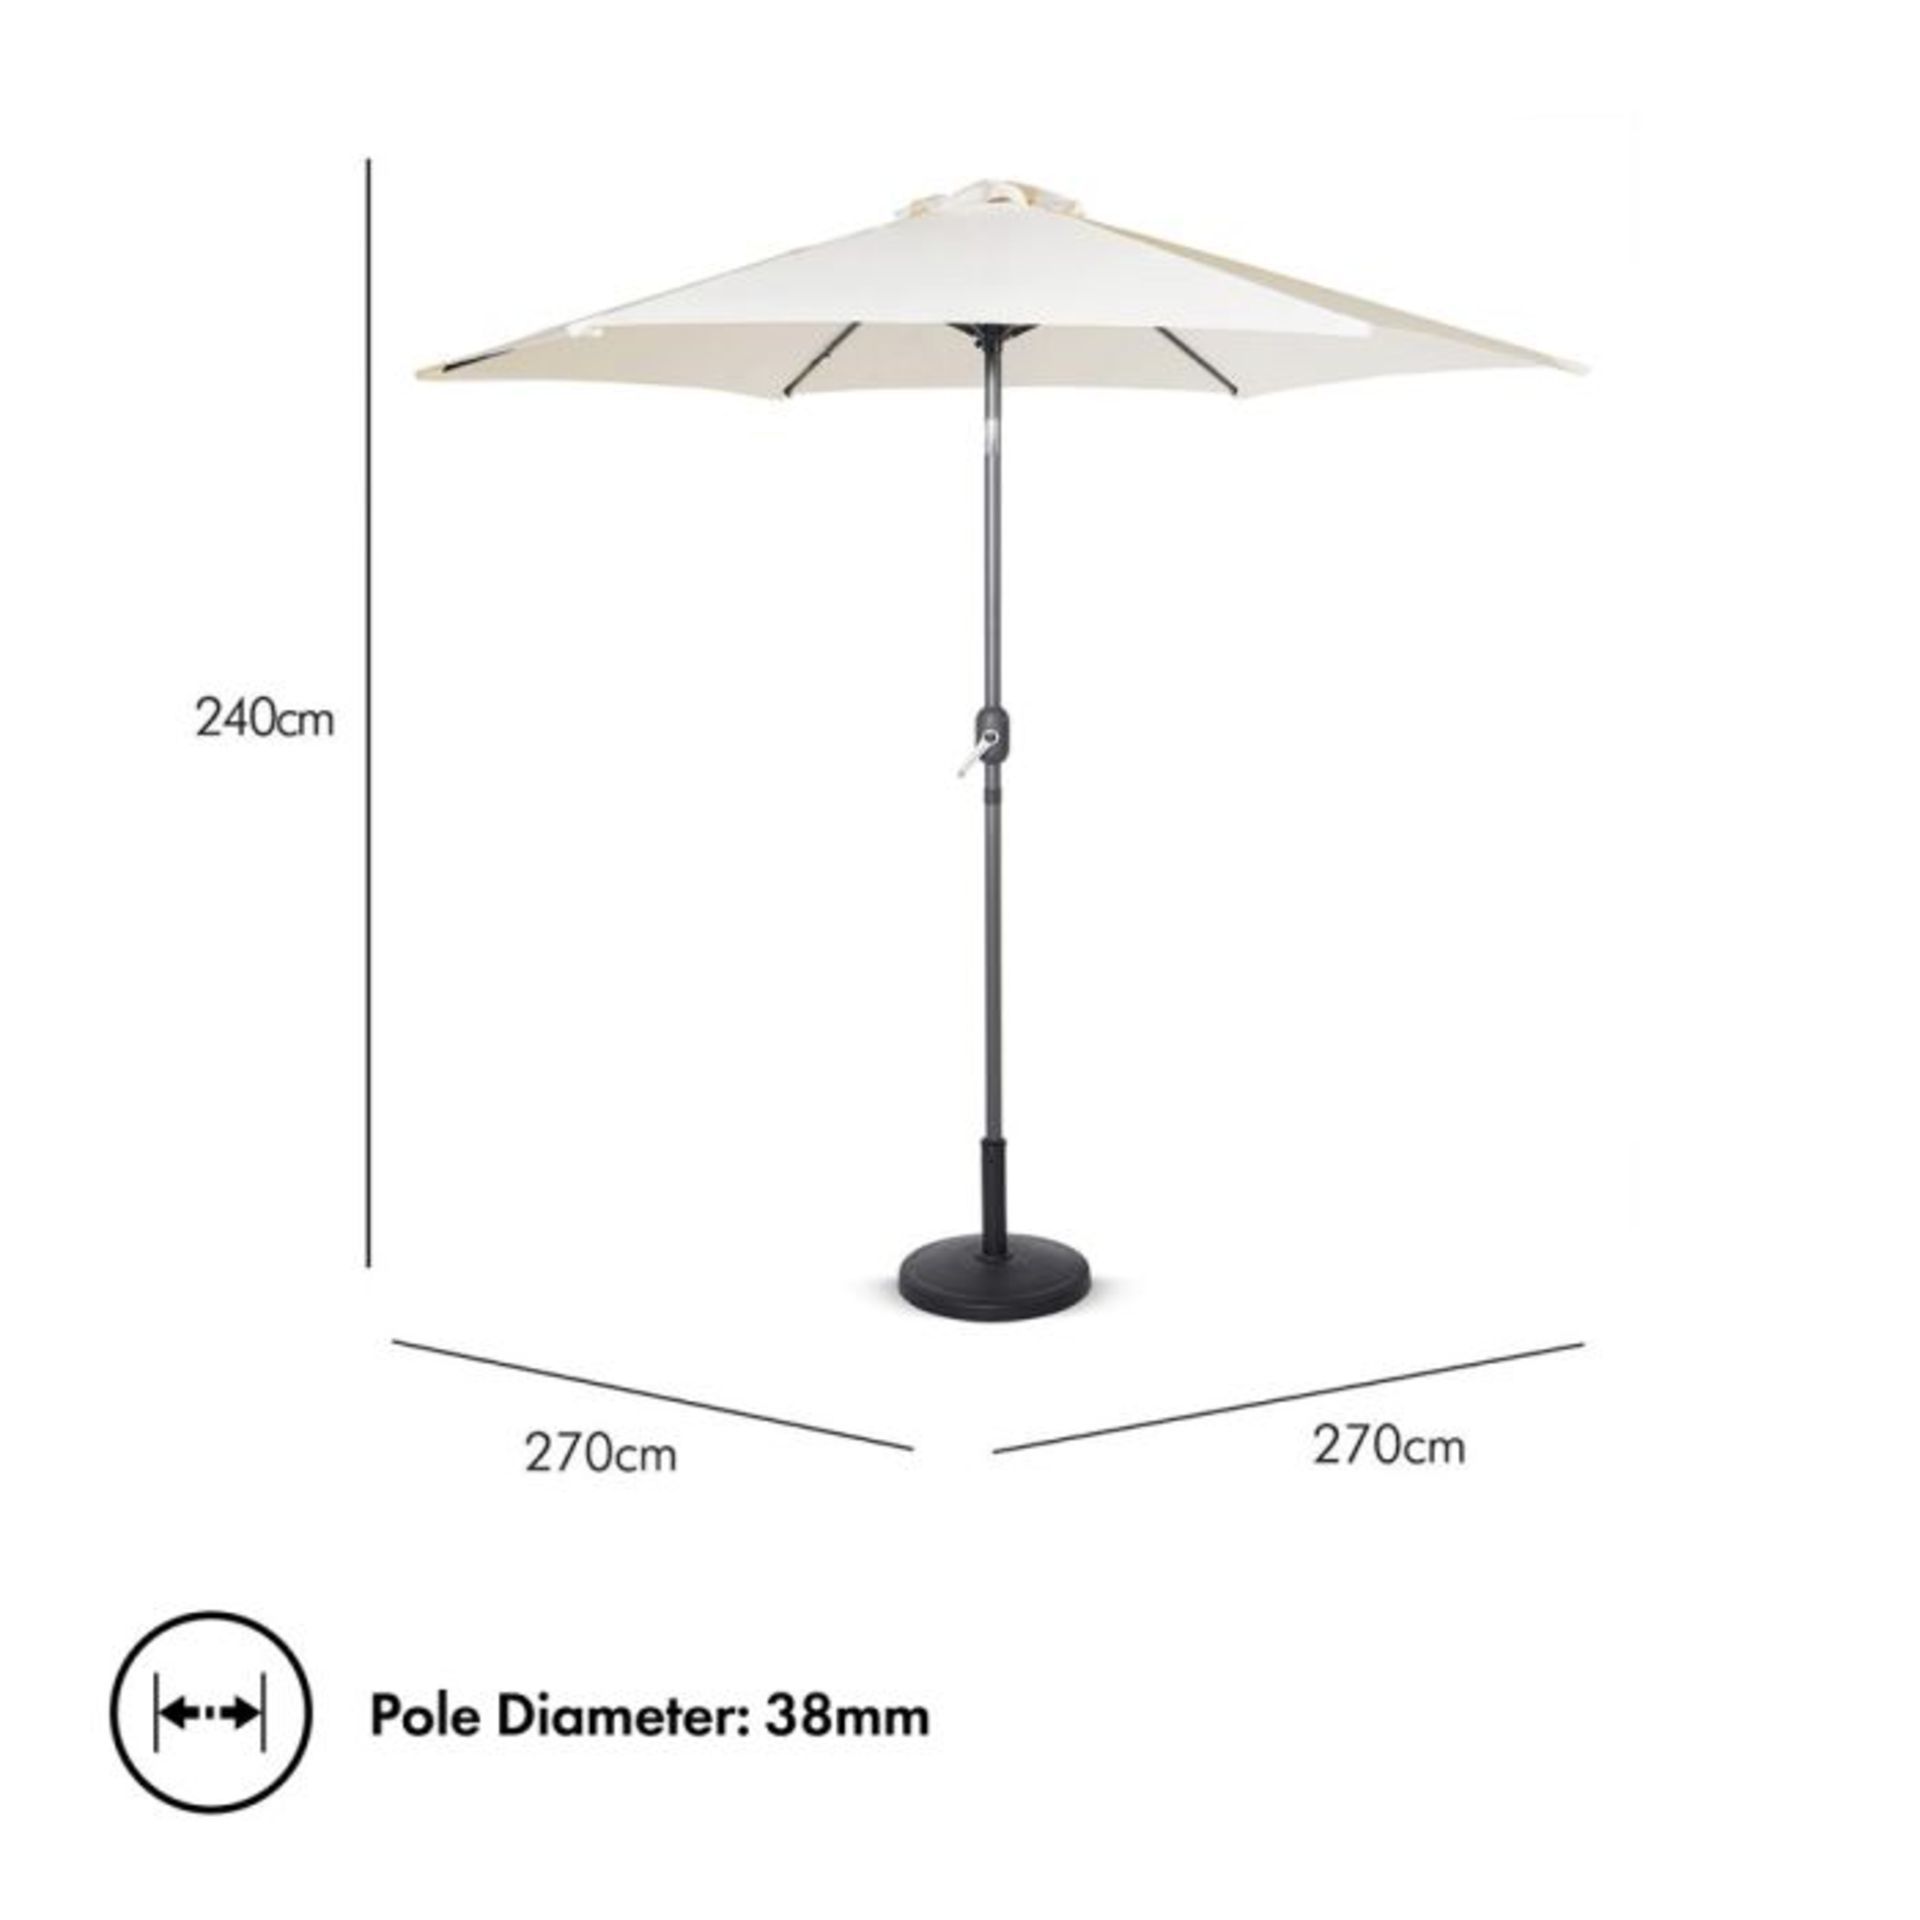 BRAND NEW & BOXED Ivory Cream 2.7m Steel Garden Parasol R10-1. As much as everyone loves a bit of - Bild 4 aus 5